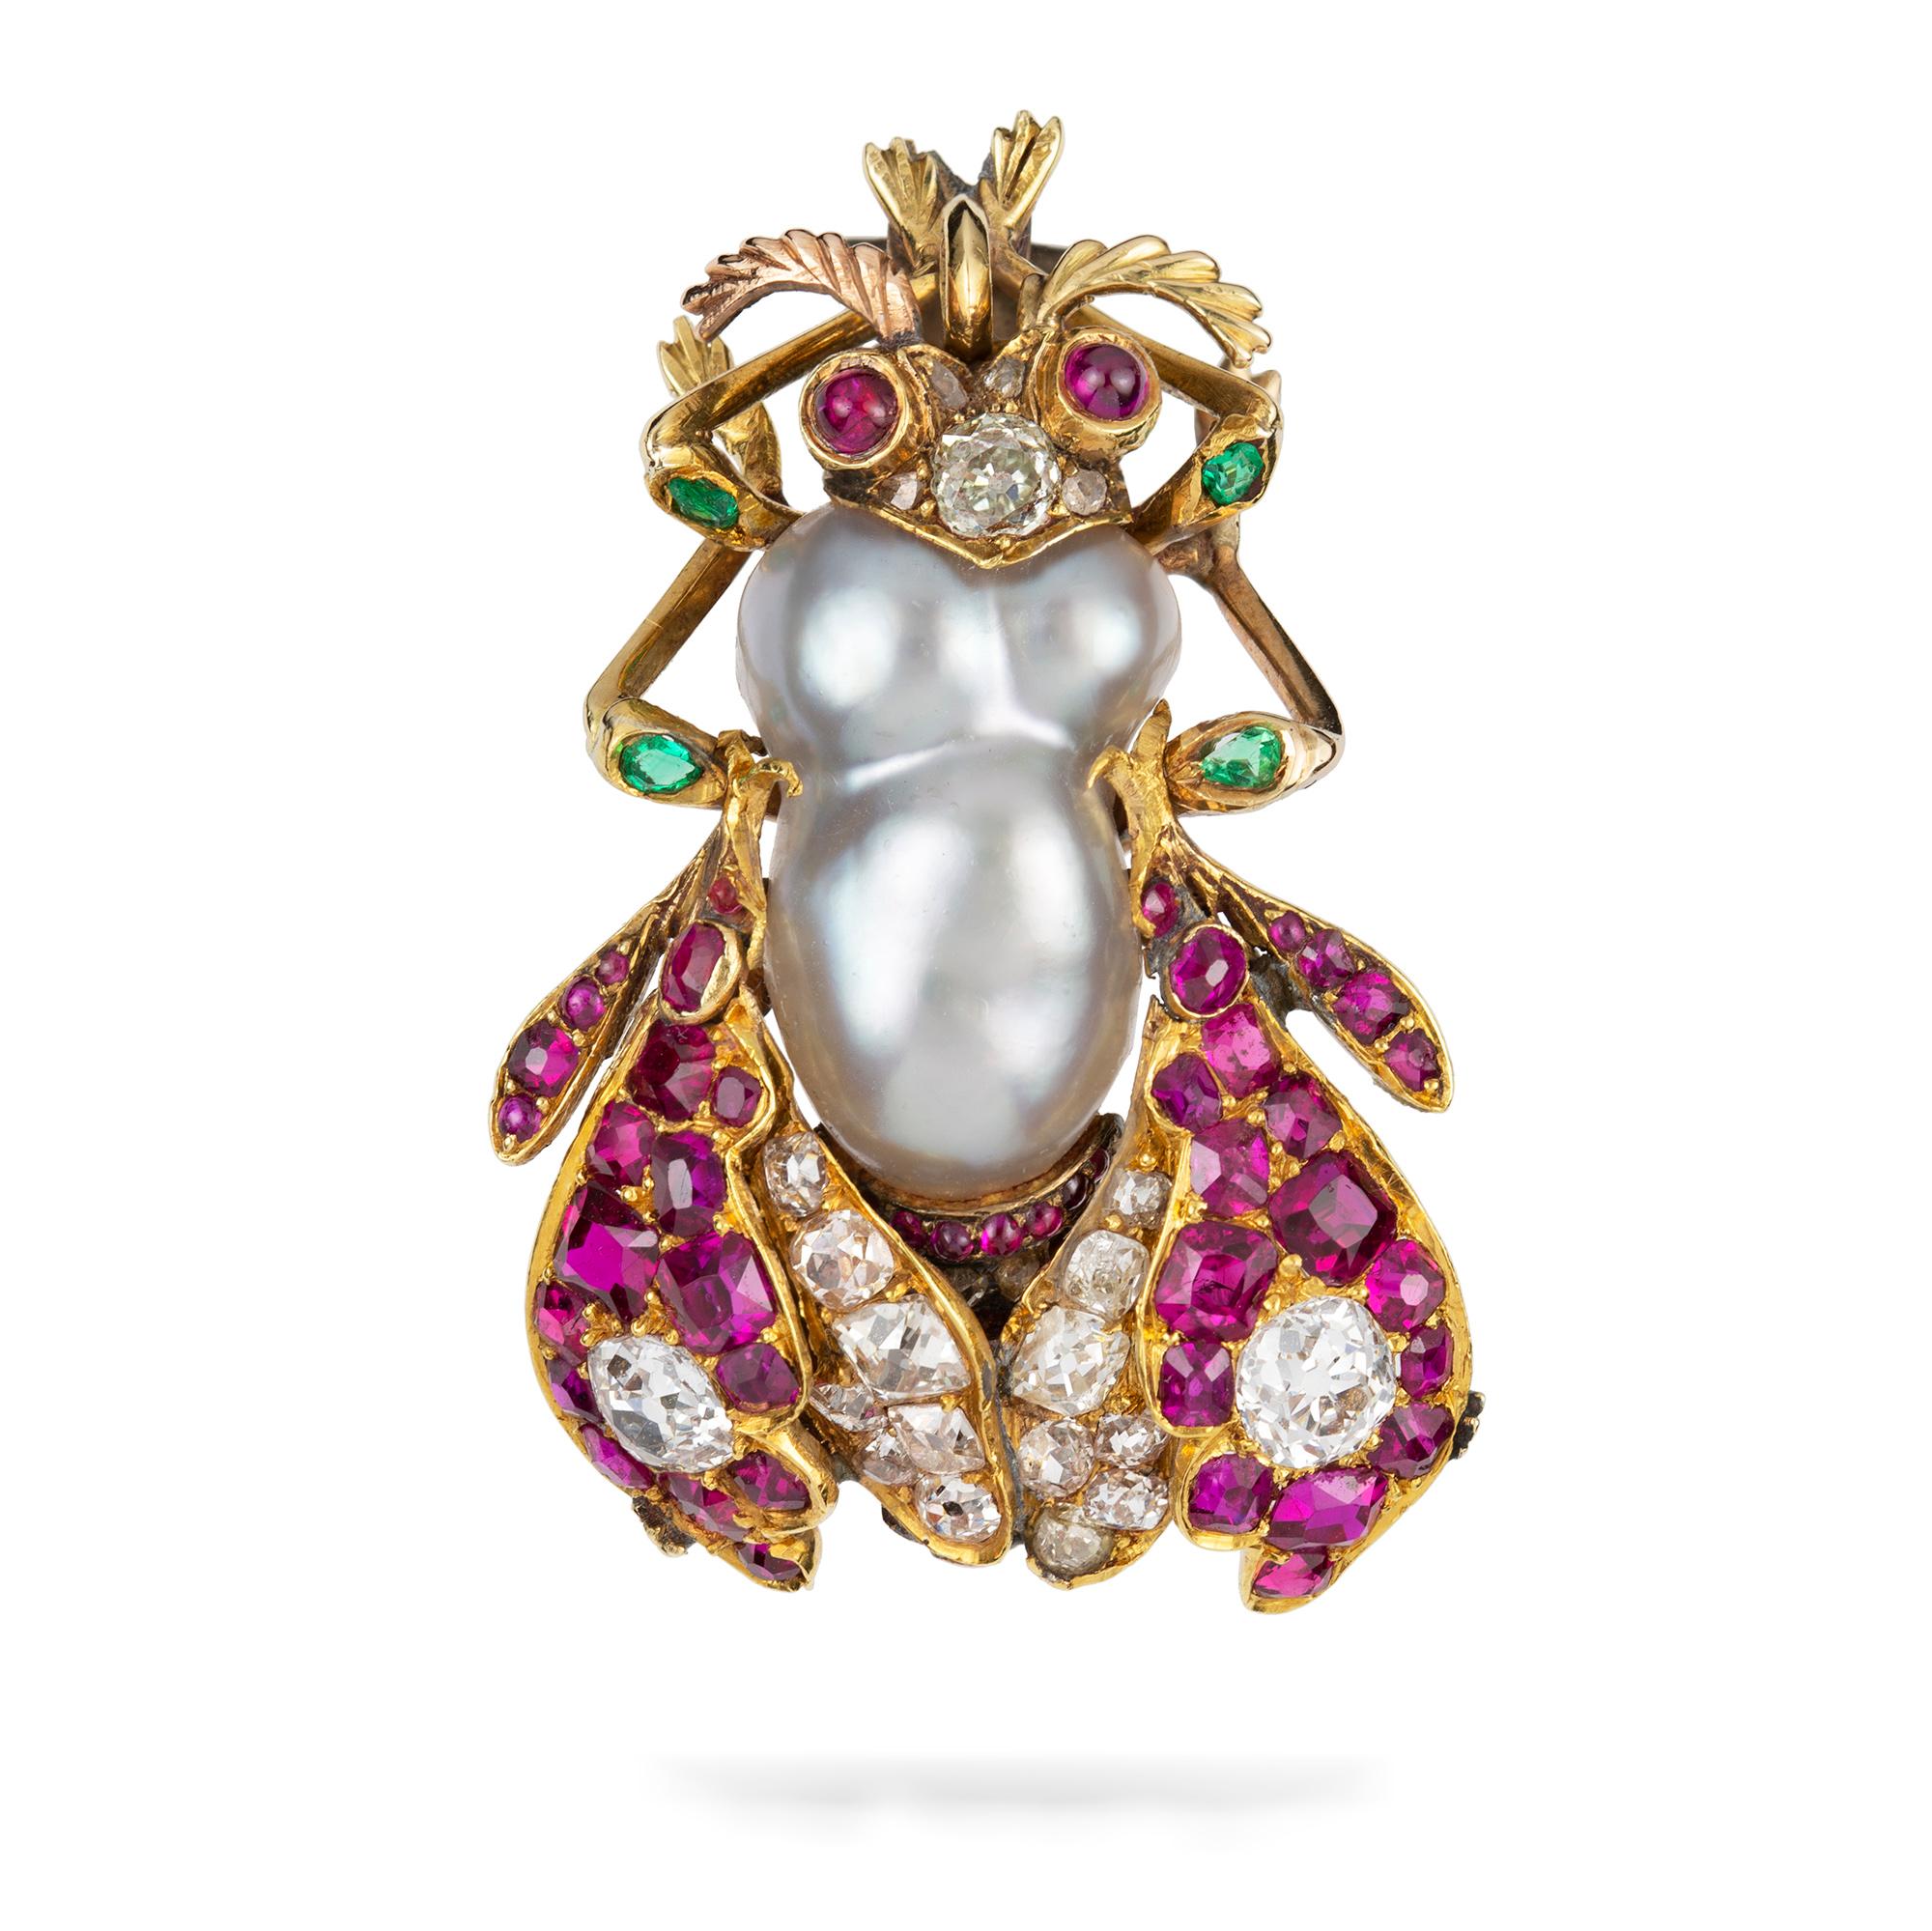 A Victorian natural pearl ruby and diamond bug brooch, the body with a baroque pearl, the legs embellished with emeralds and the wings with faceted rubies and old-cut diamonds, the head with old-cut diamonds and cabochon-cut ruby eyes, the diamonds